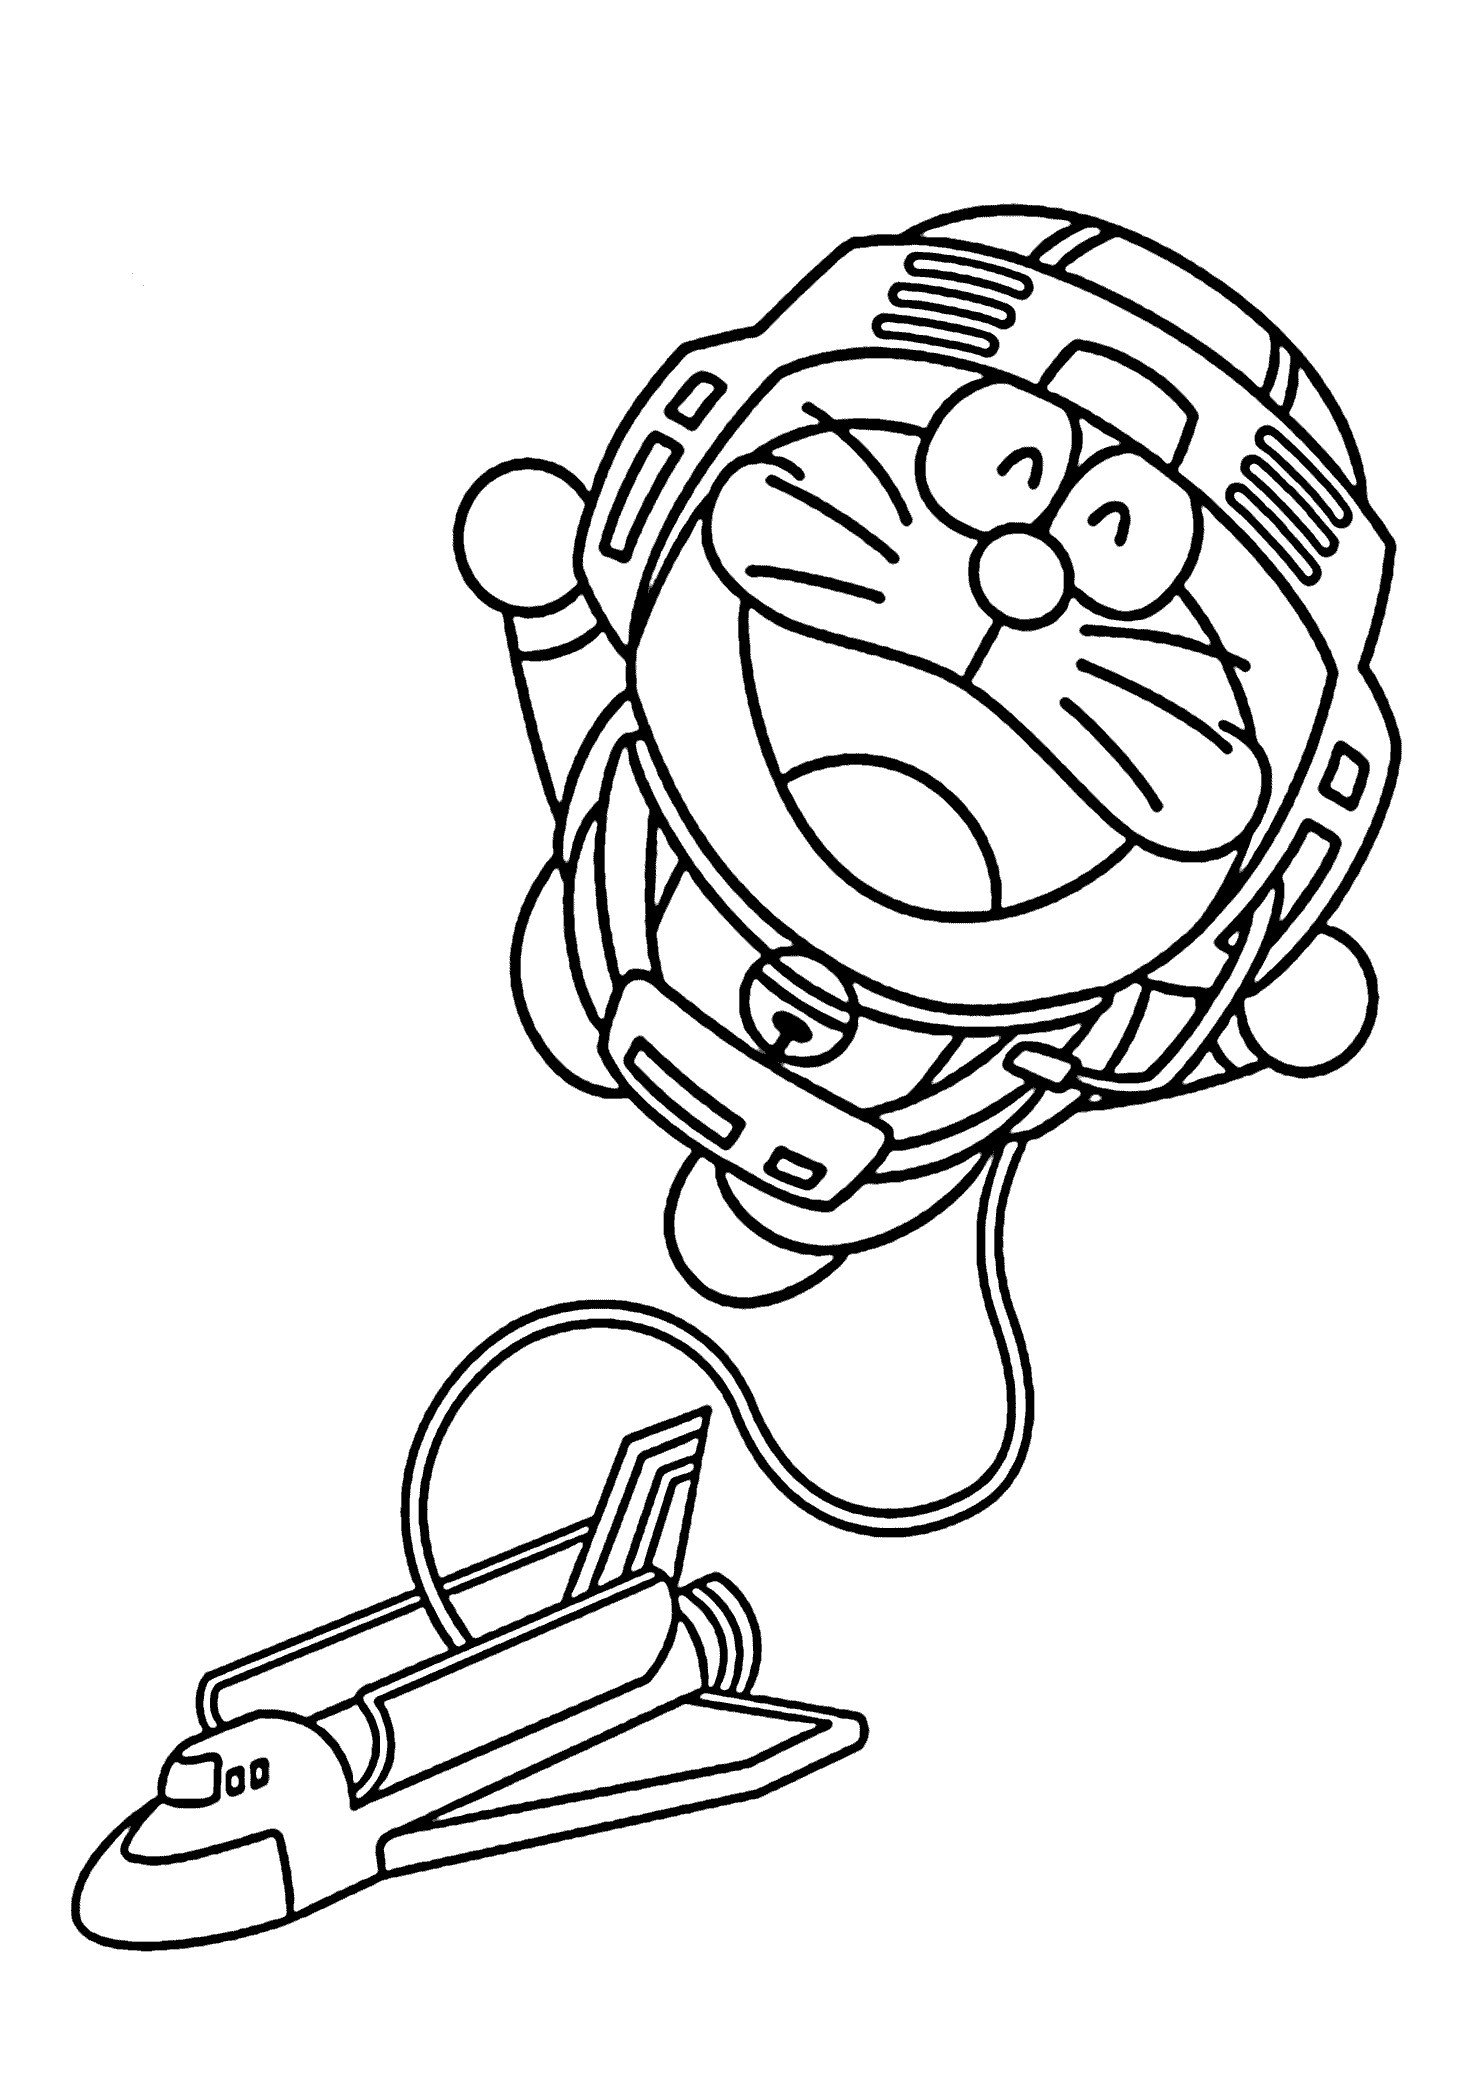 Doraemon Coloring Pages   Best Coloring Pages For Kids